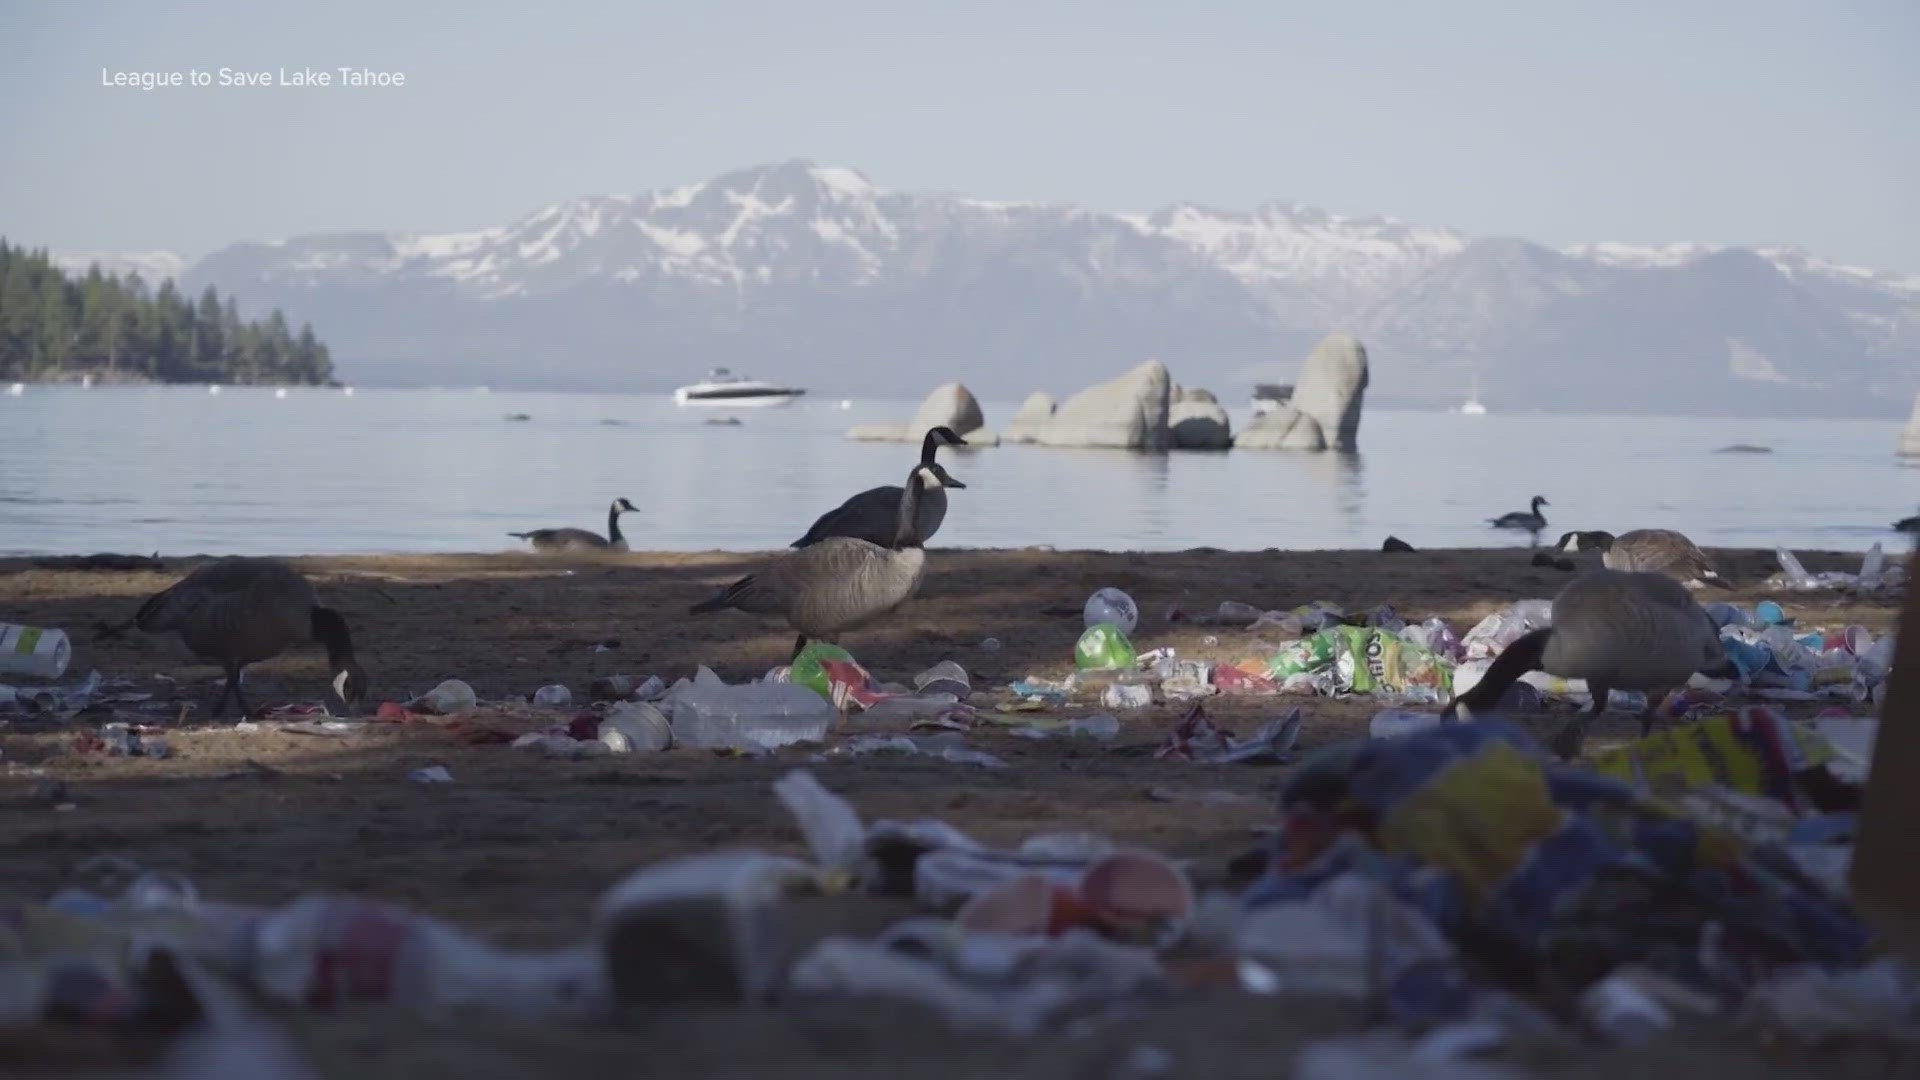 More than four tons of trash was left behind from the Fourth of July celebrations at Lake Tahoe.